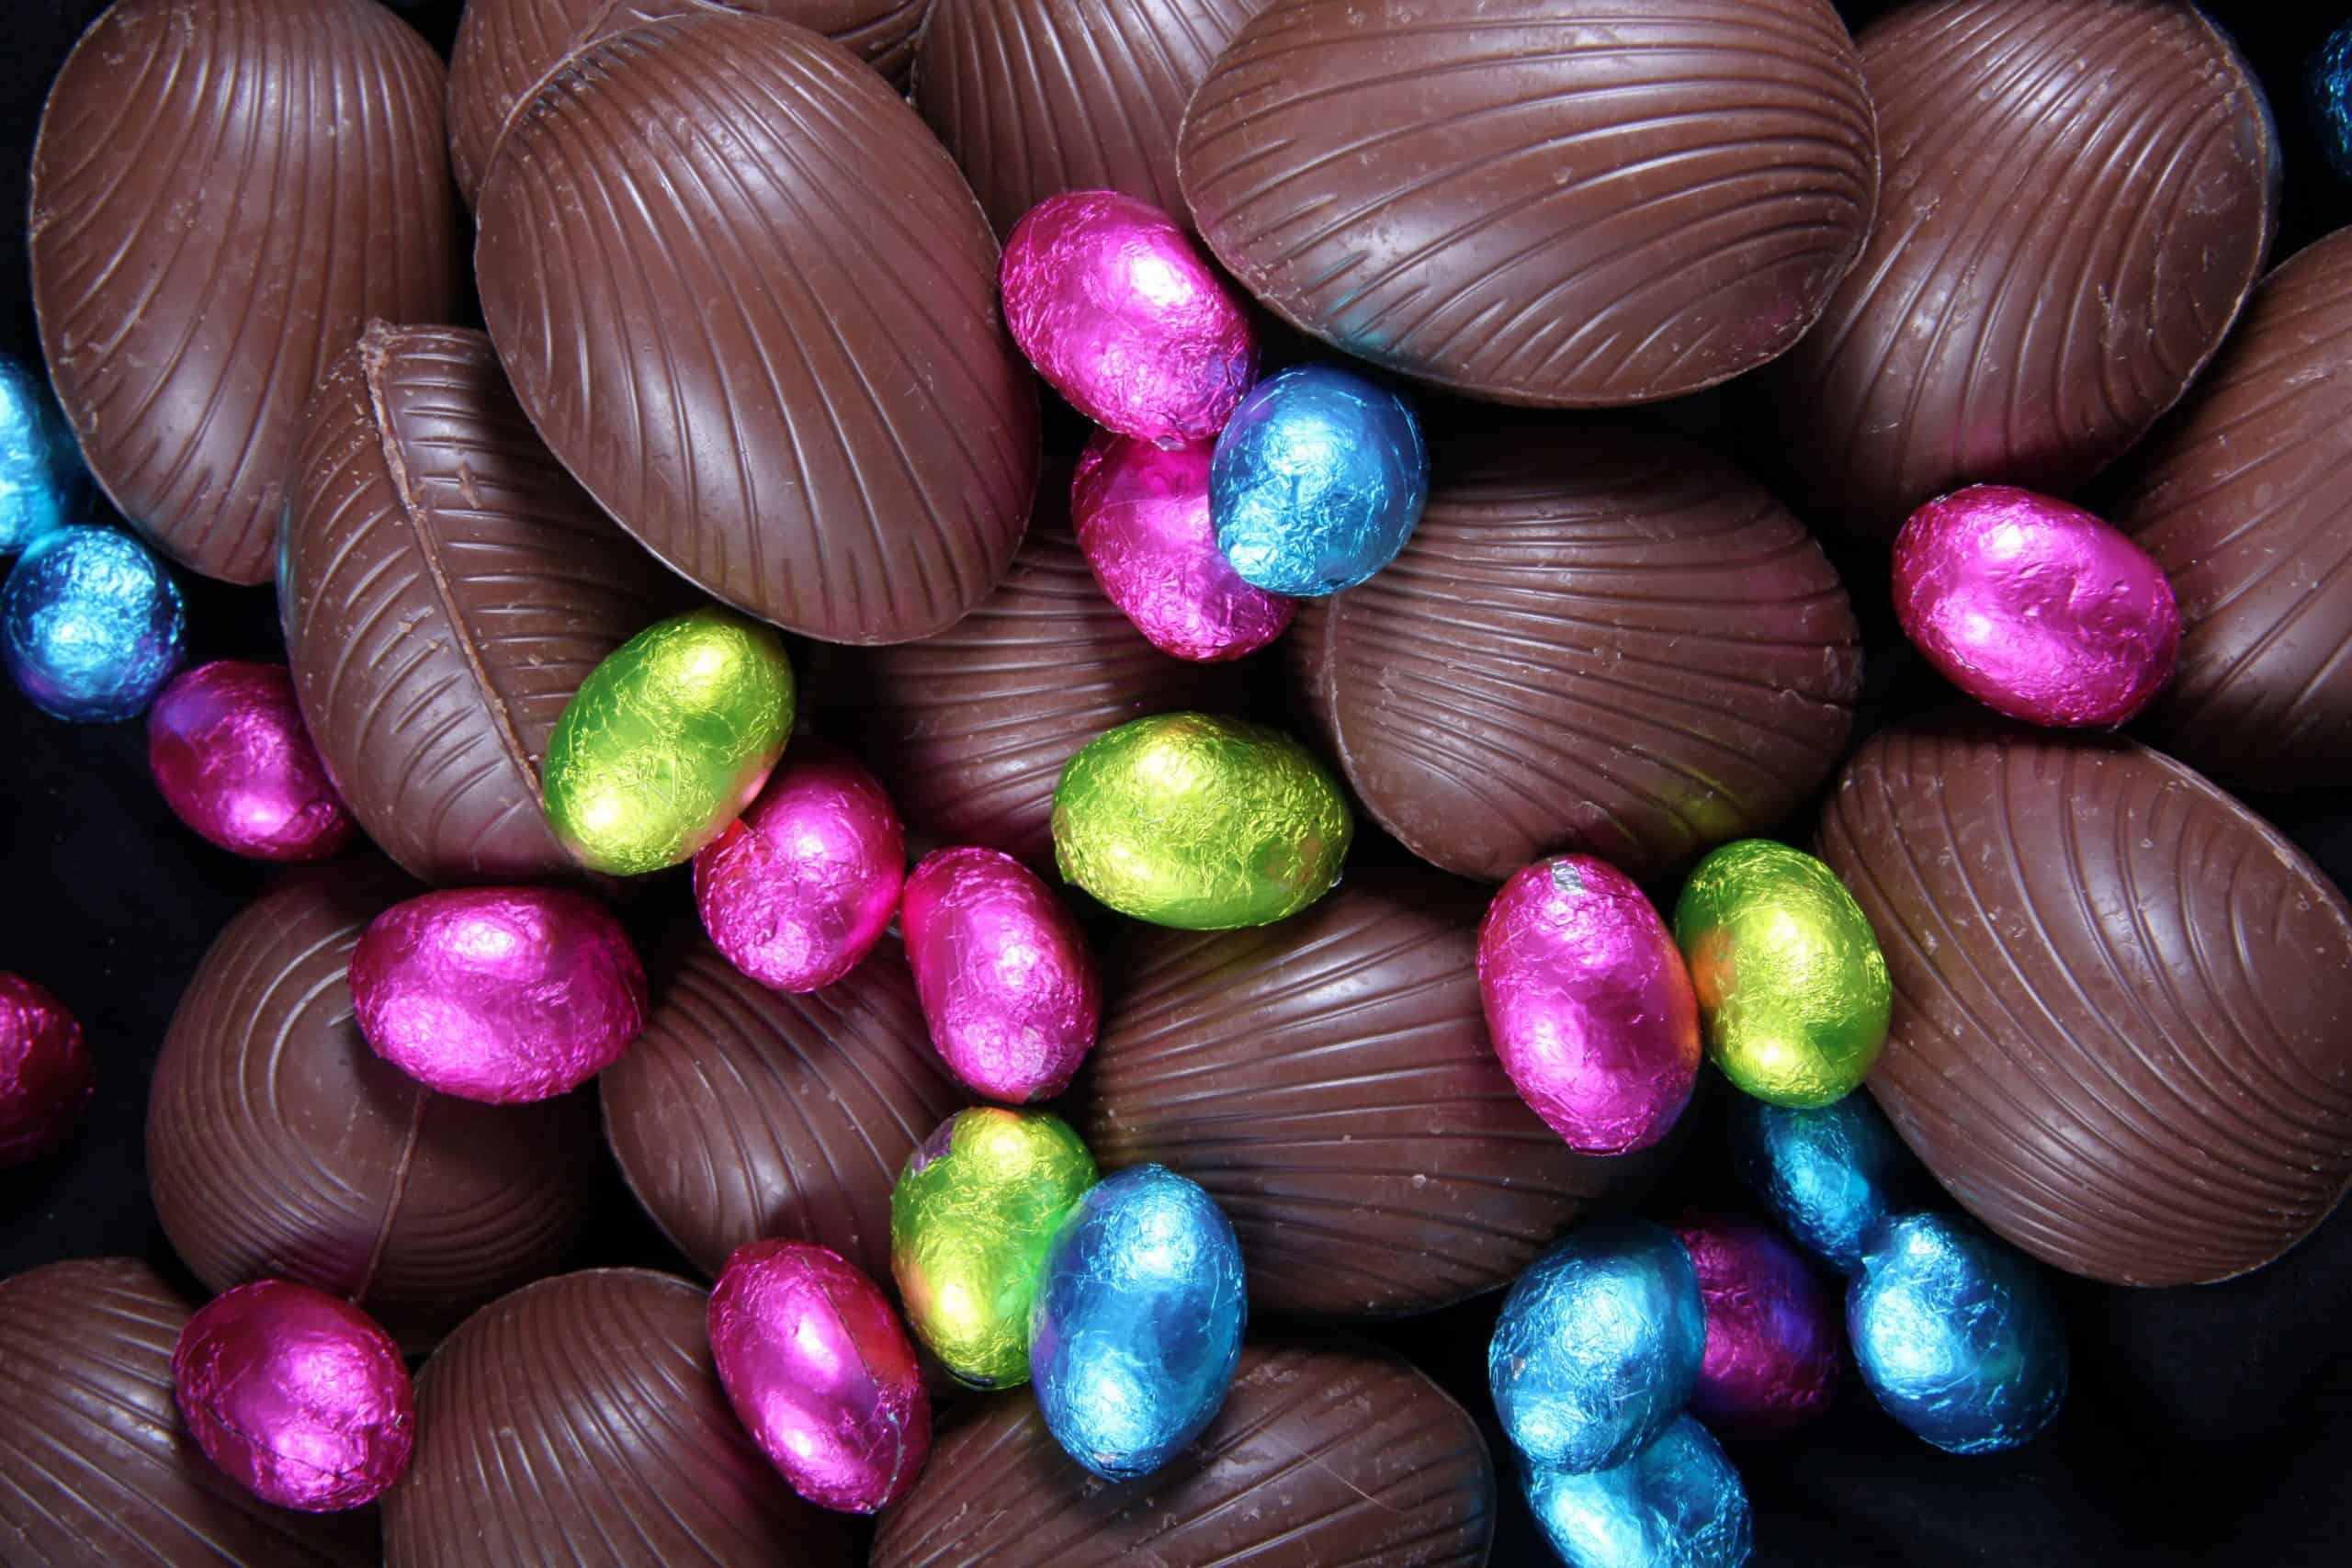 British chocolatiers reveal how Brexit blighted busy Easter period